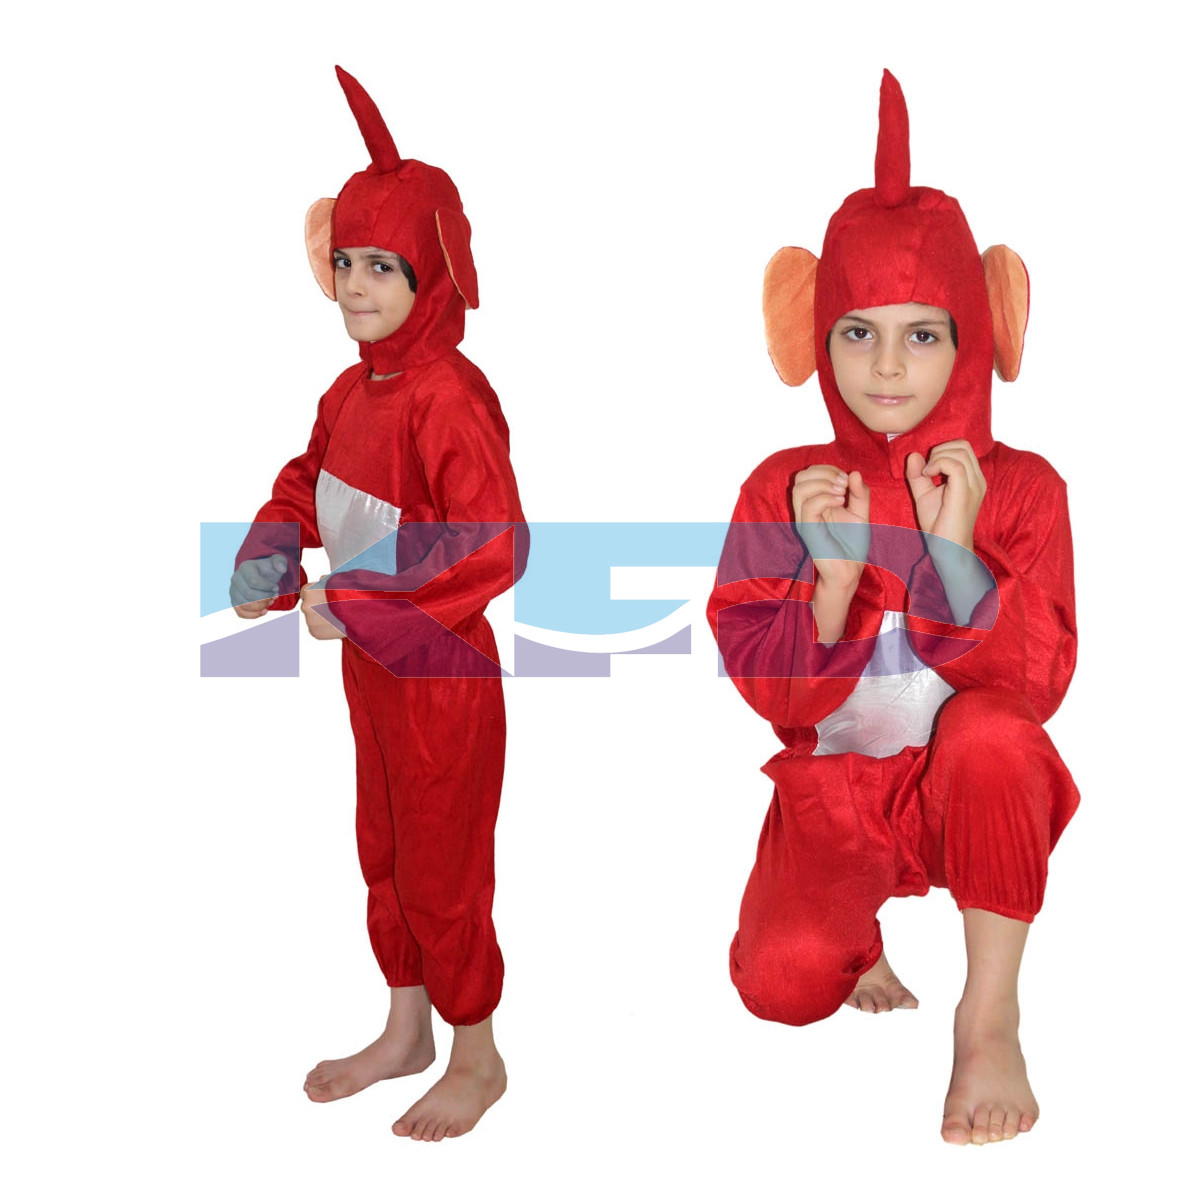  Teletubbies Red Cartoon Costume For School Annual function/Theme Party/Competition/Stage Shows/Birthday Party Dress